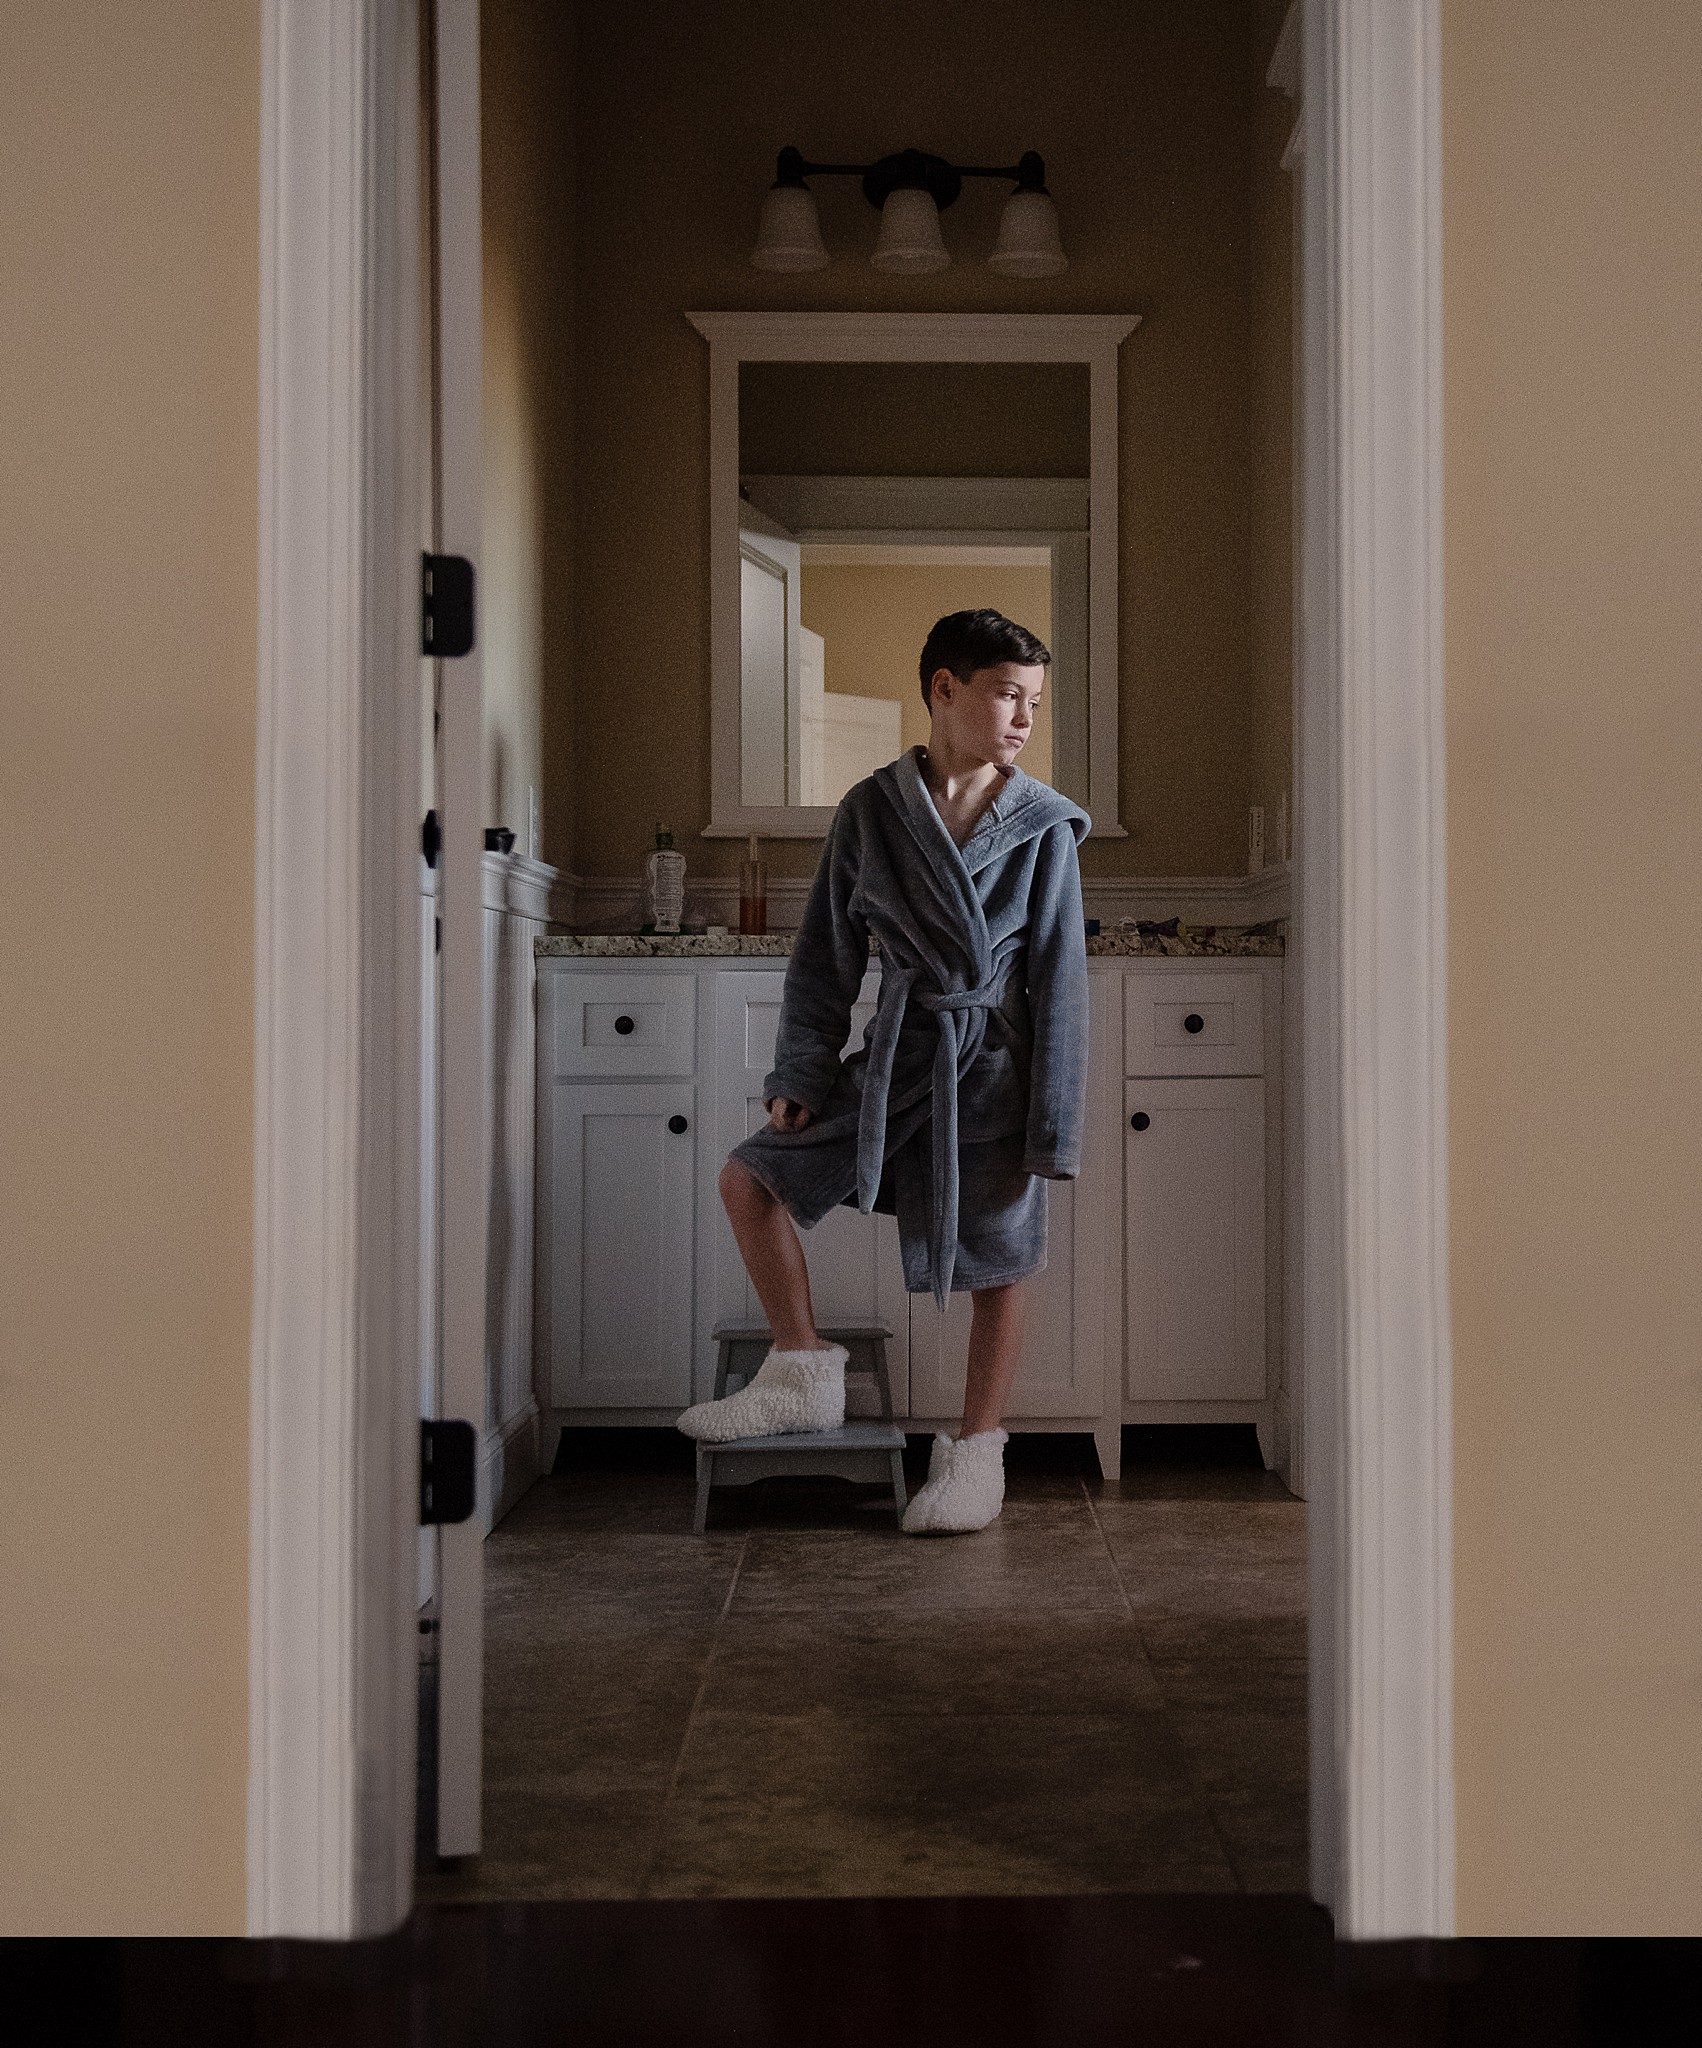 A boy in a robe stands at the bathroom doorway as if posing for a fashion magazine.